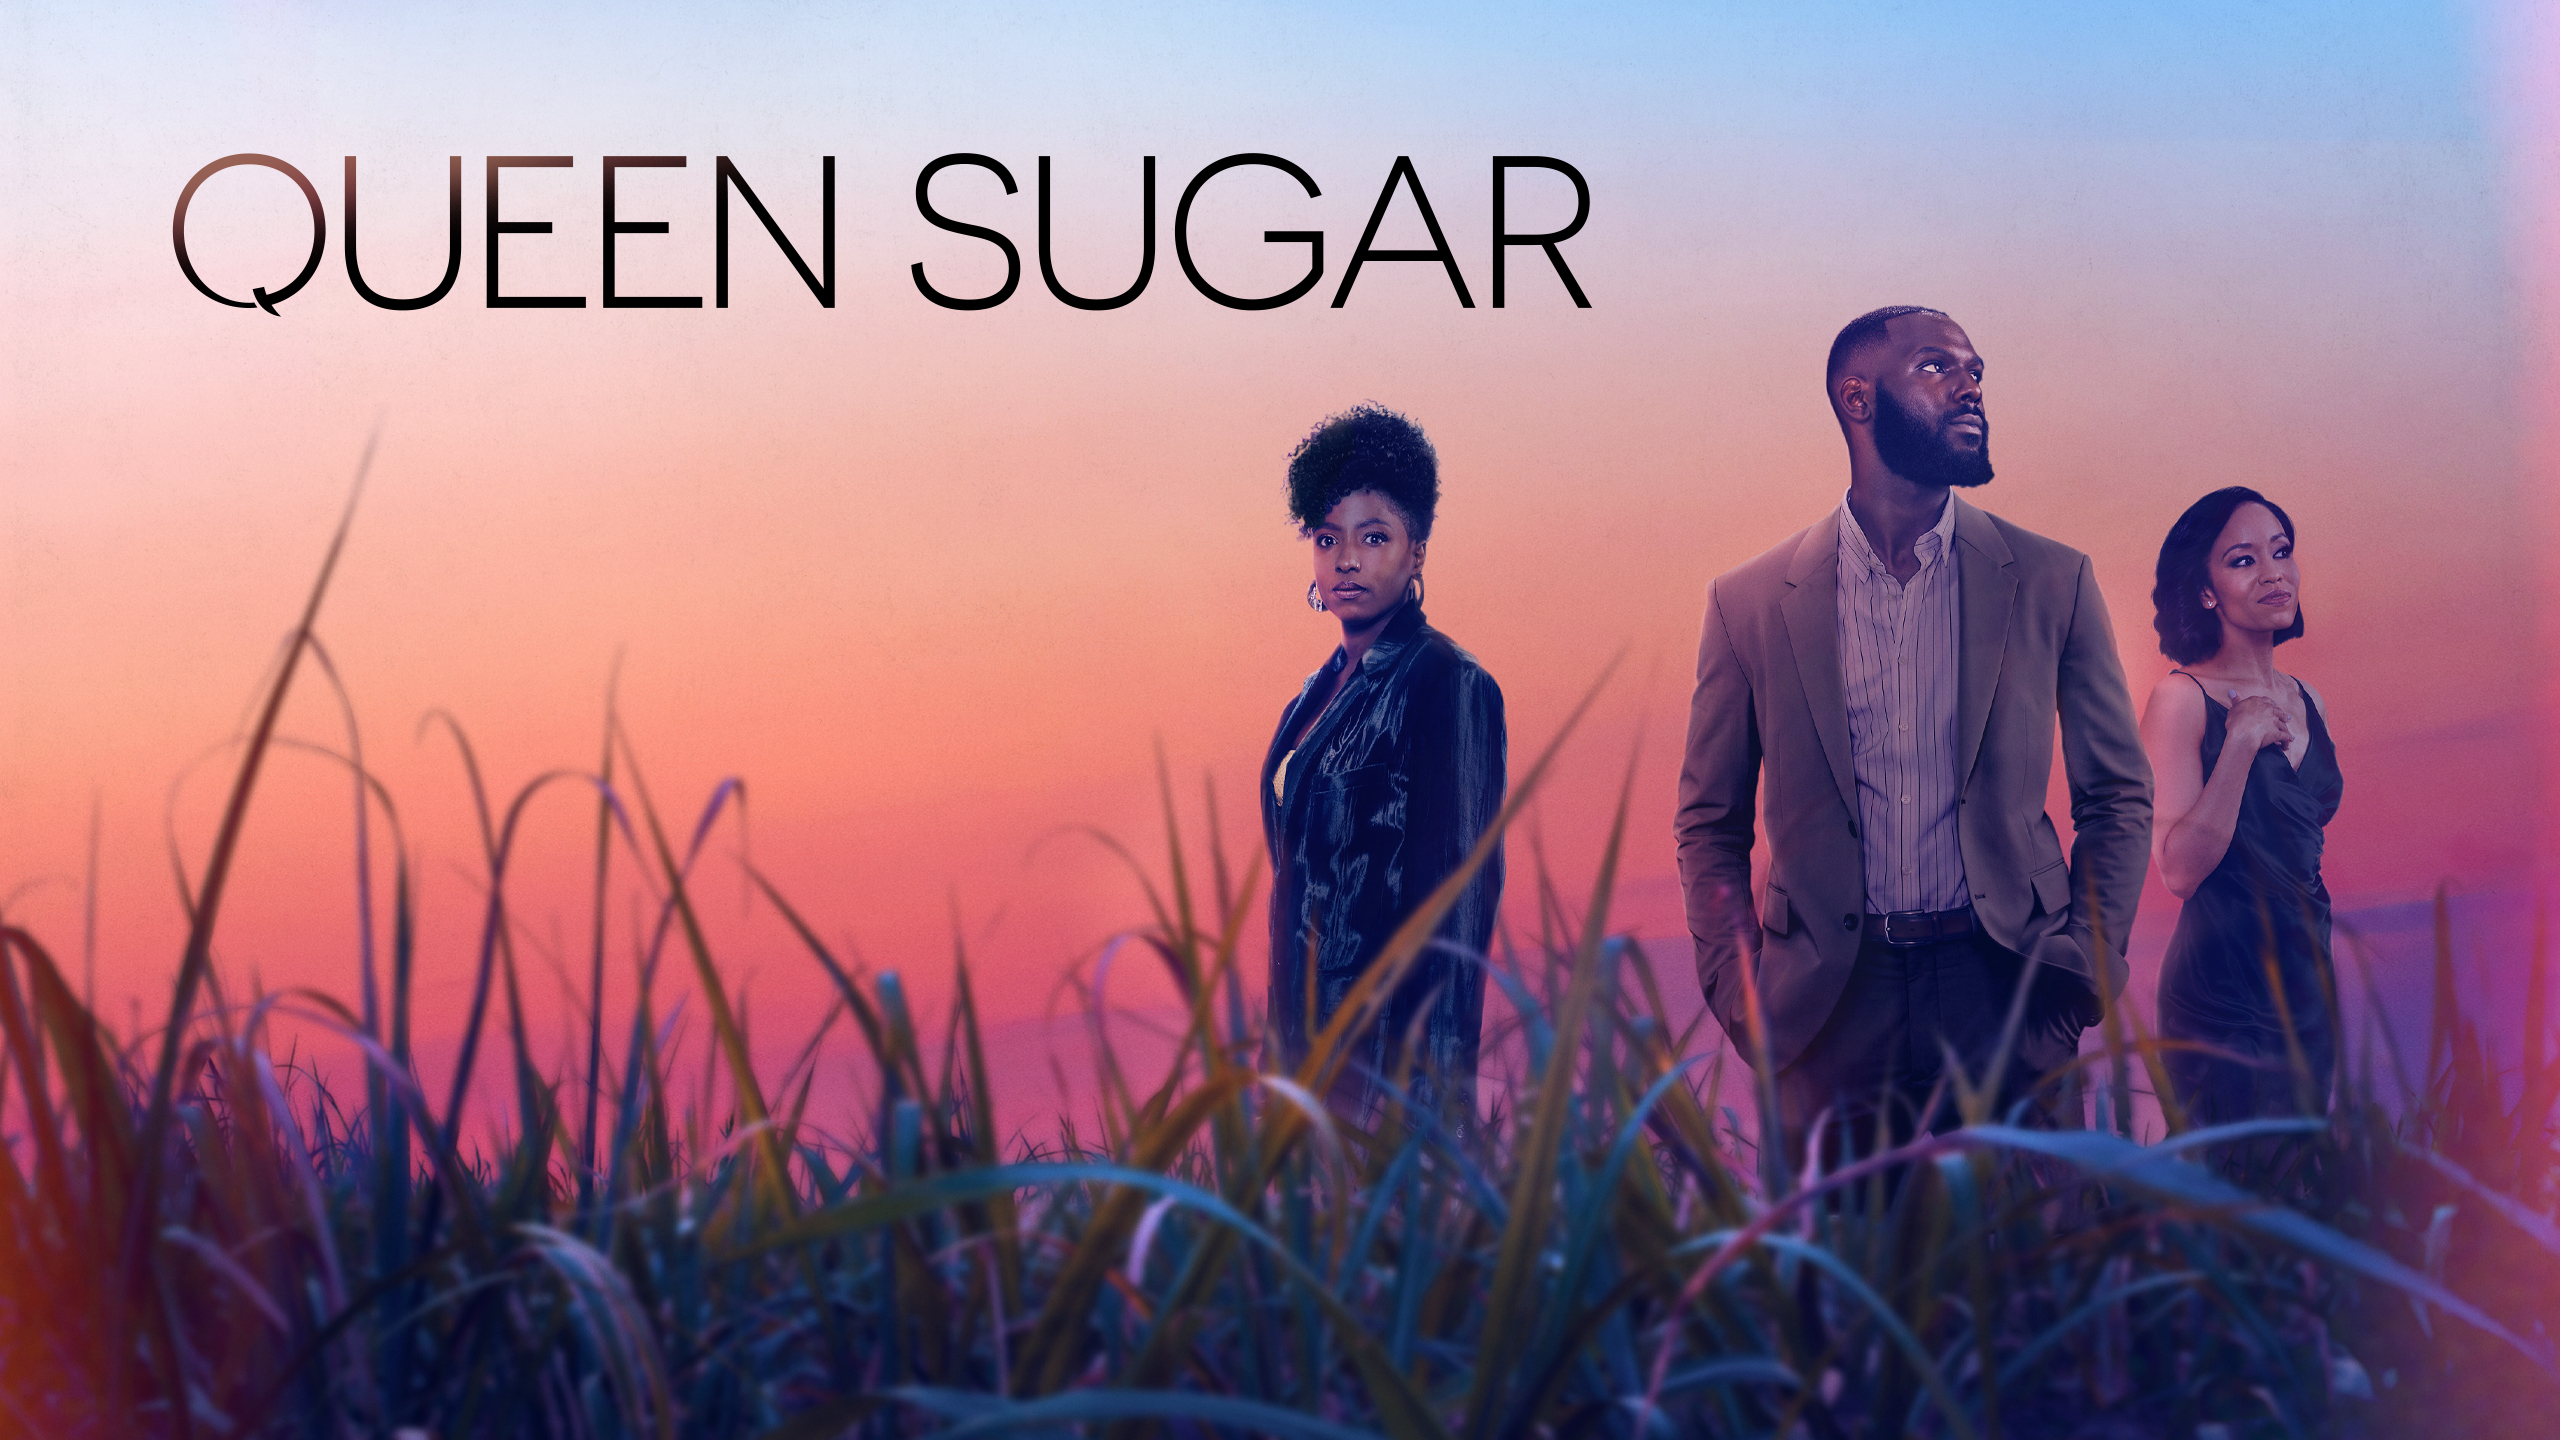 Queen sugar poster- Activate and watch OWN TV (start.watchown.tv/activate)